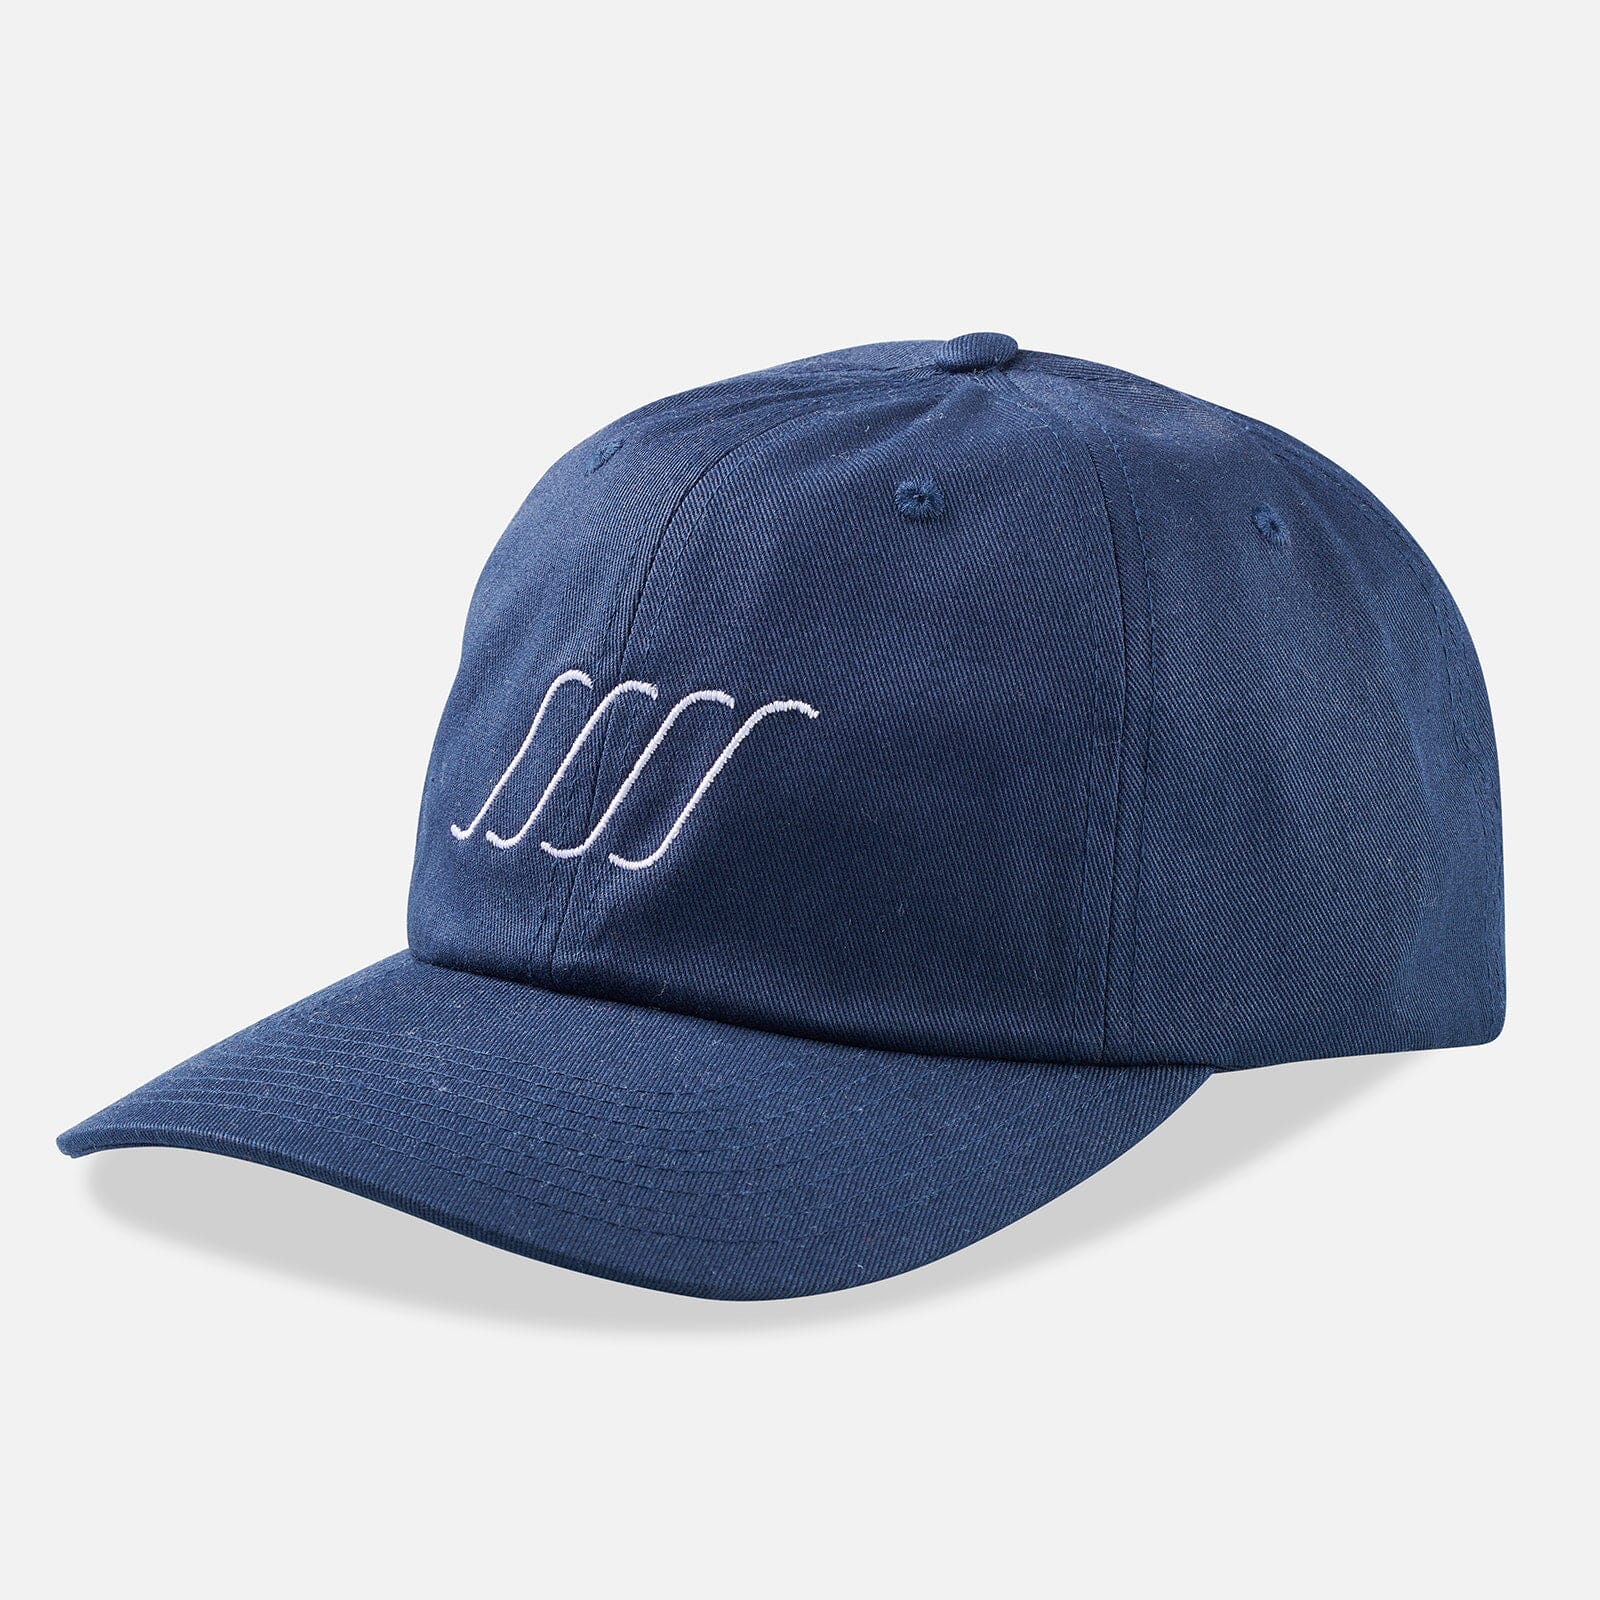 South Swell Embroidered Hat Hats SOUTH SWELL Navy 